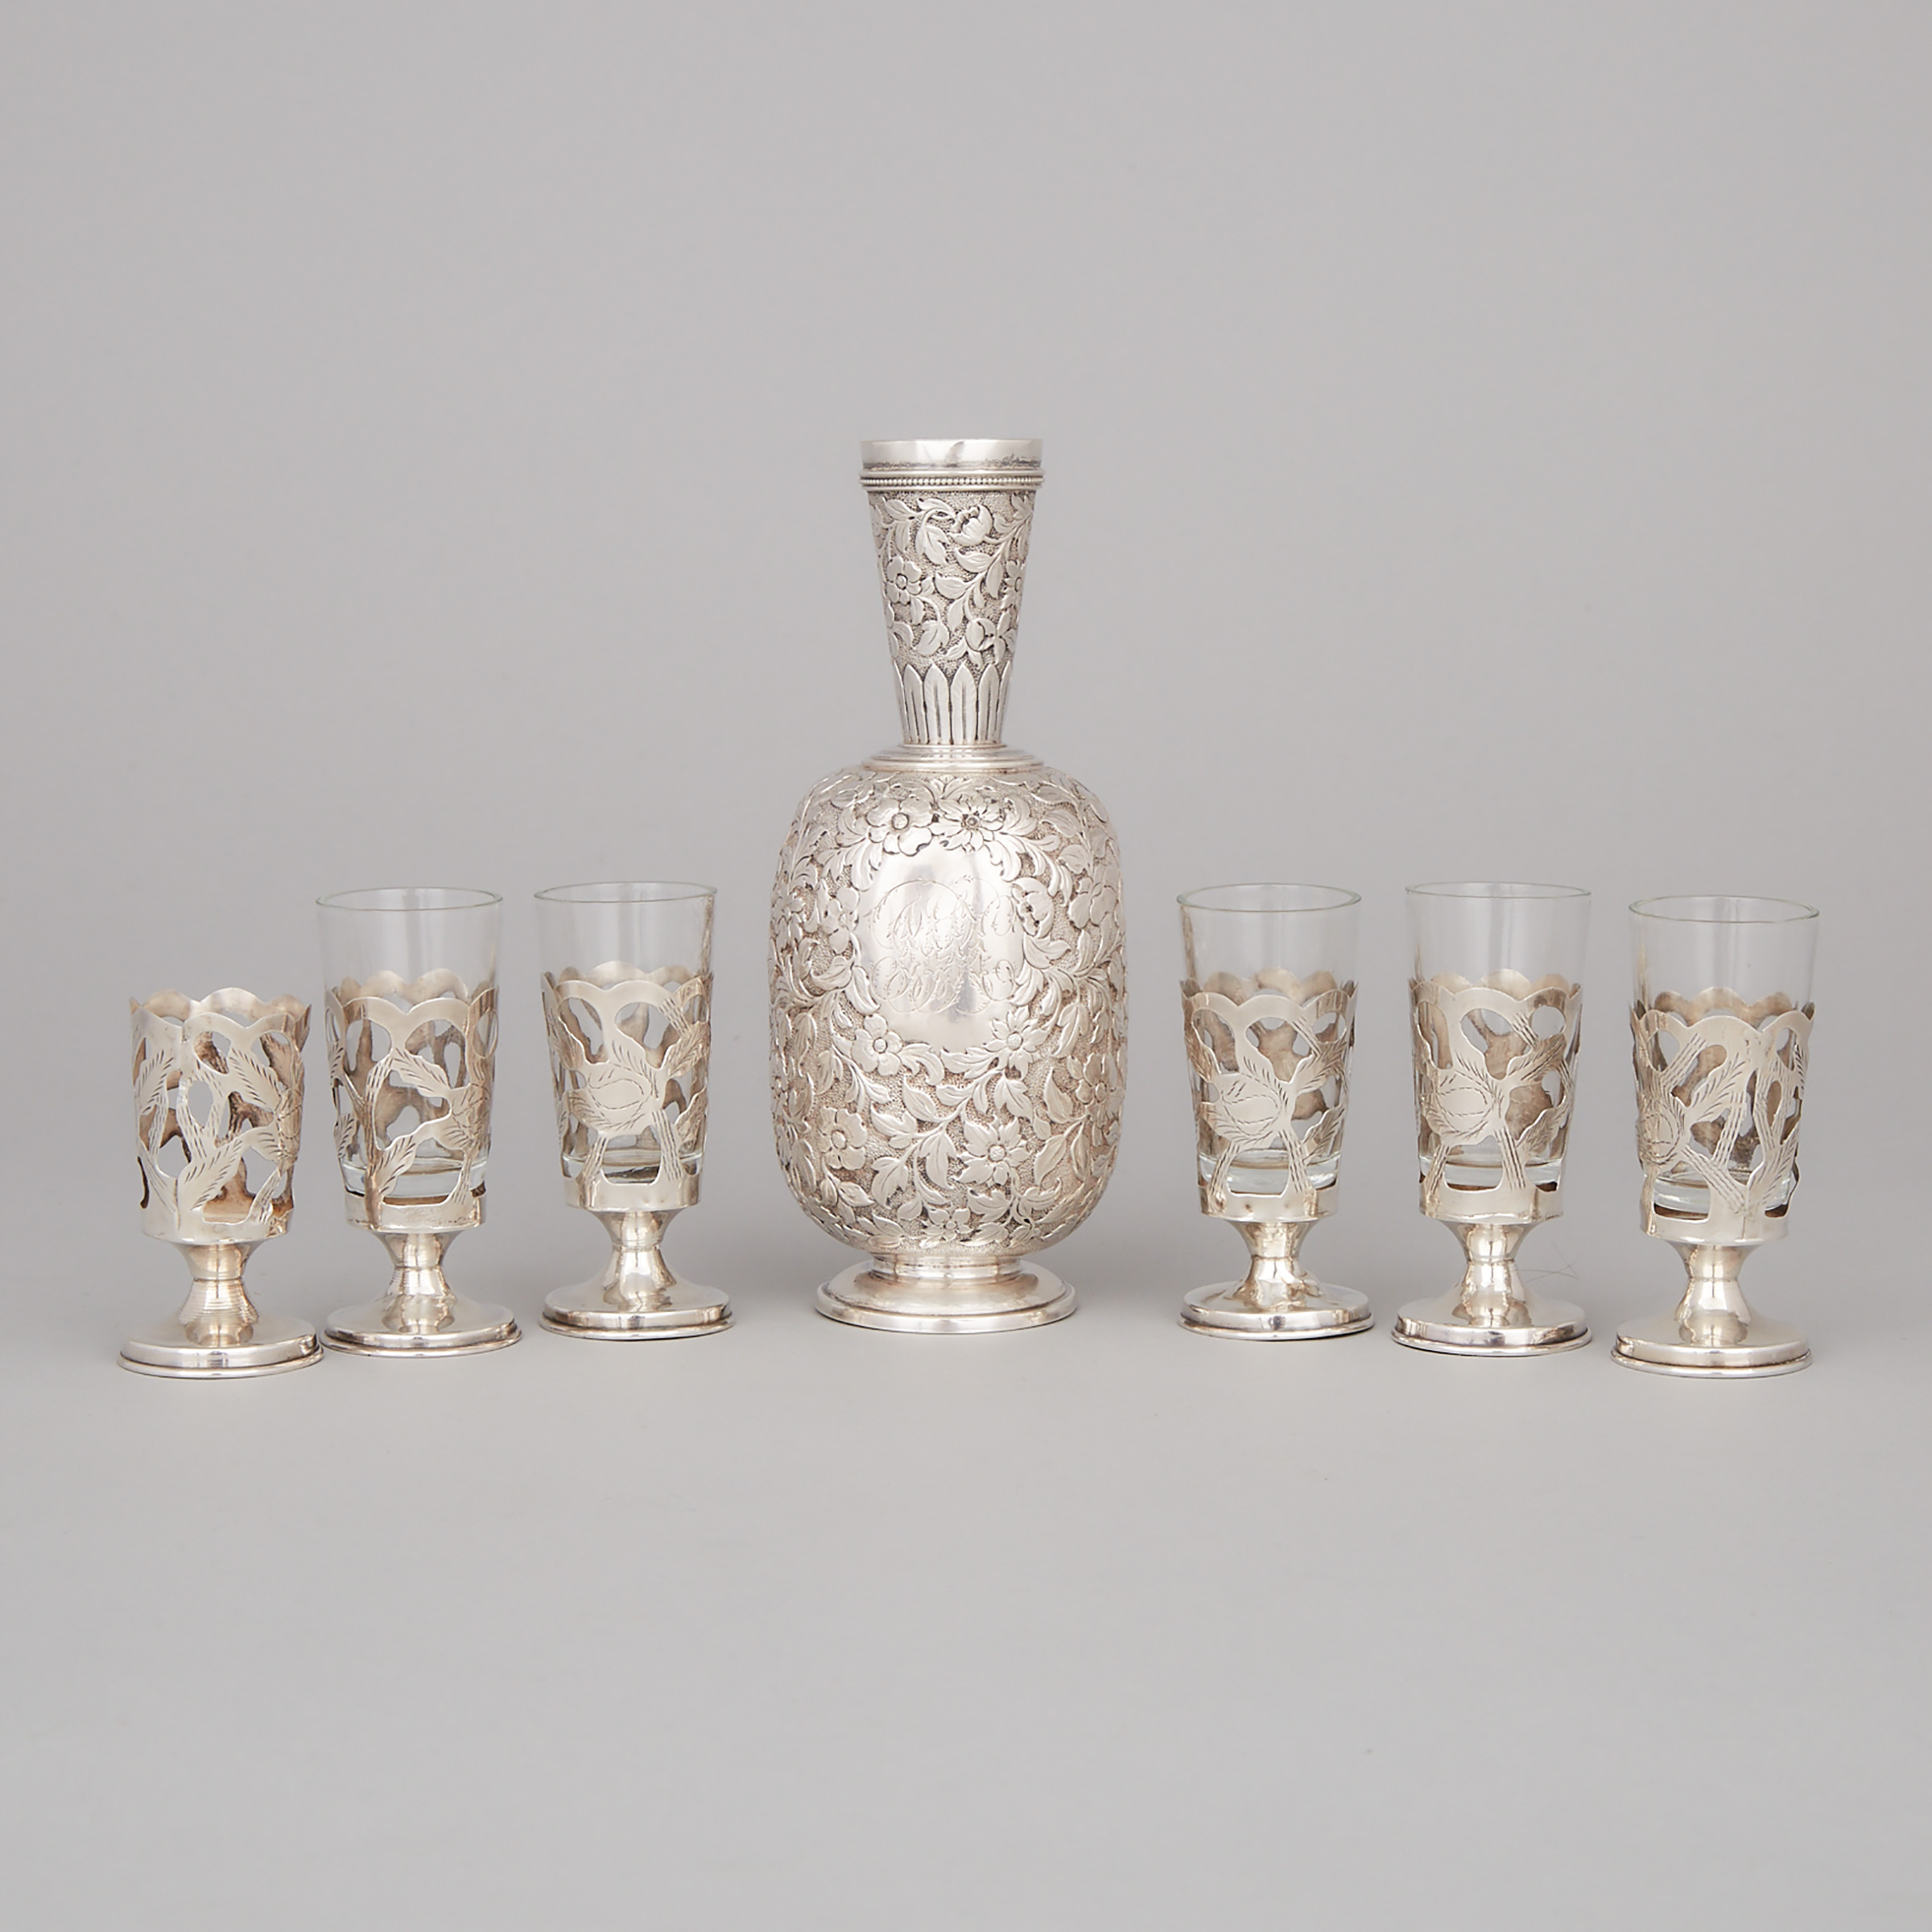 American Silver Repoussé Vase, probably Bigelow, Kennard & Co., Boston, Mass., late 19th century, together with Six Mexican Silver Liqueur Glass Frames, Taxco, 20th century